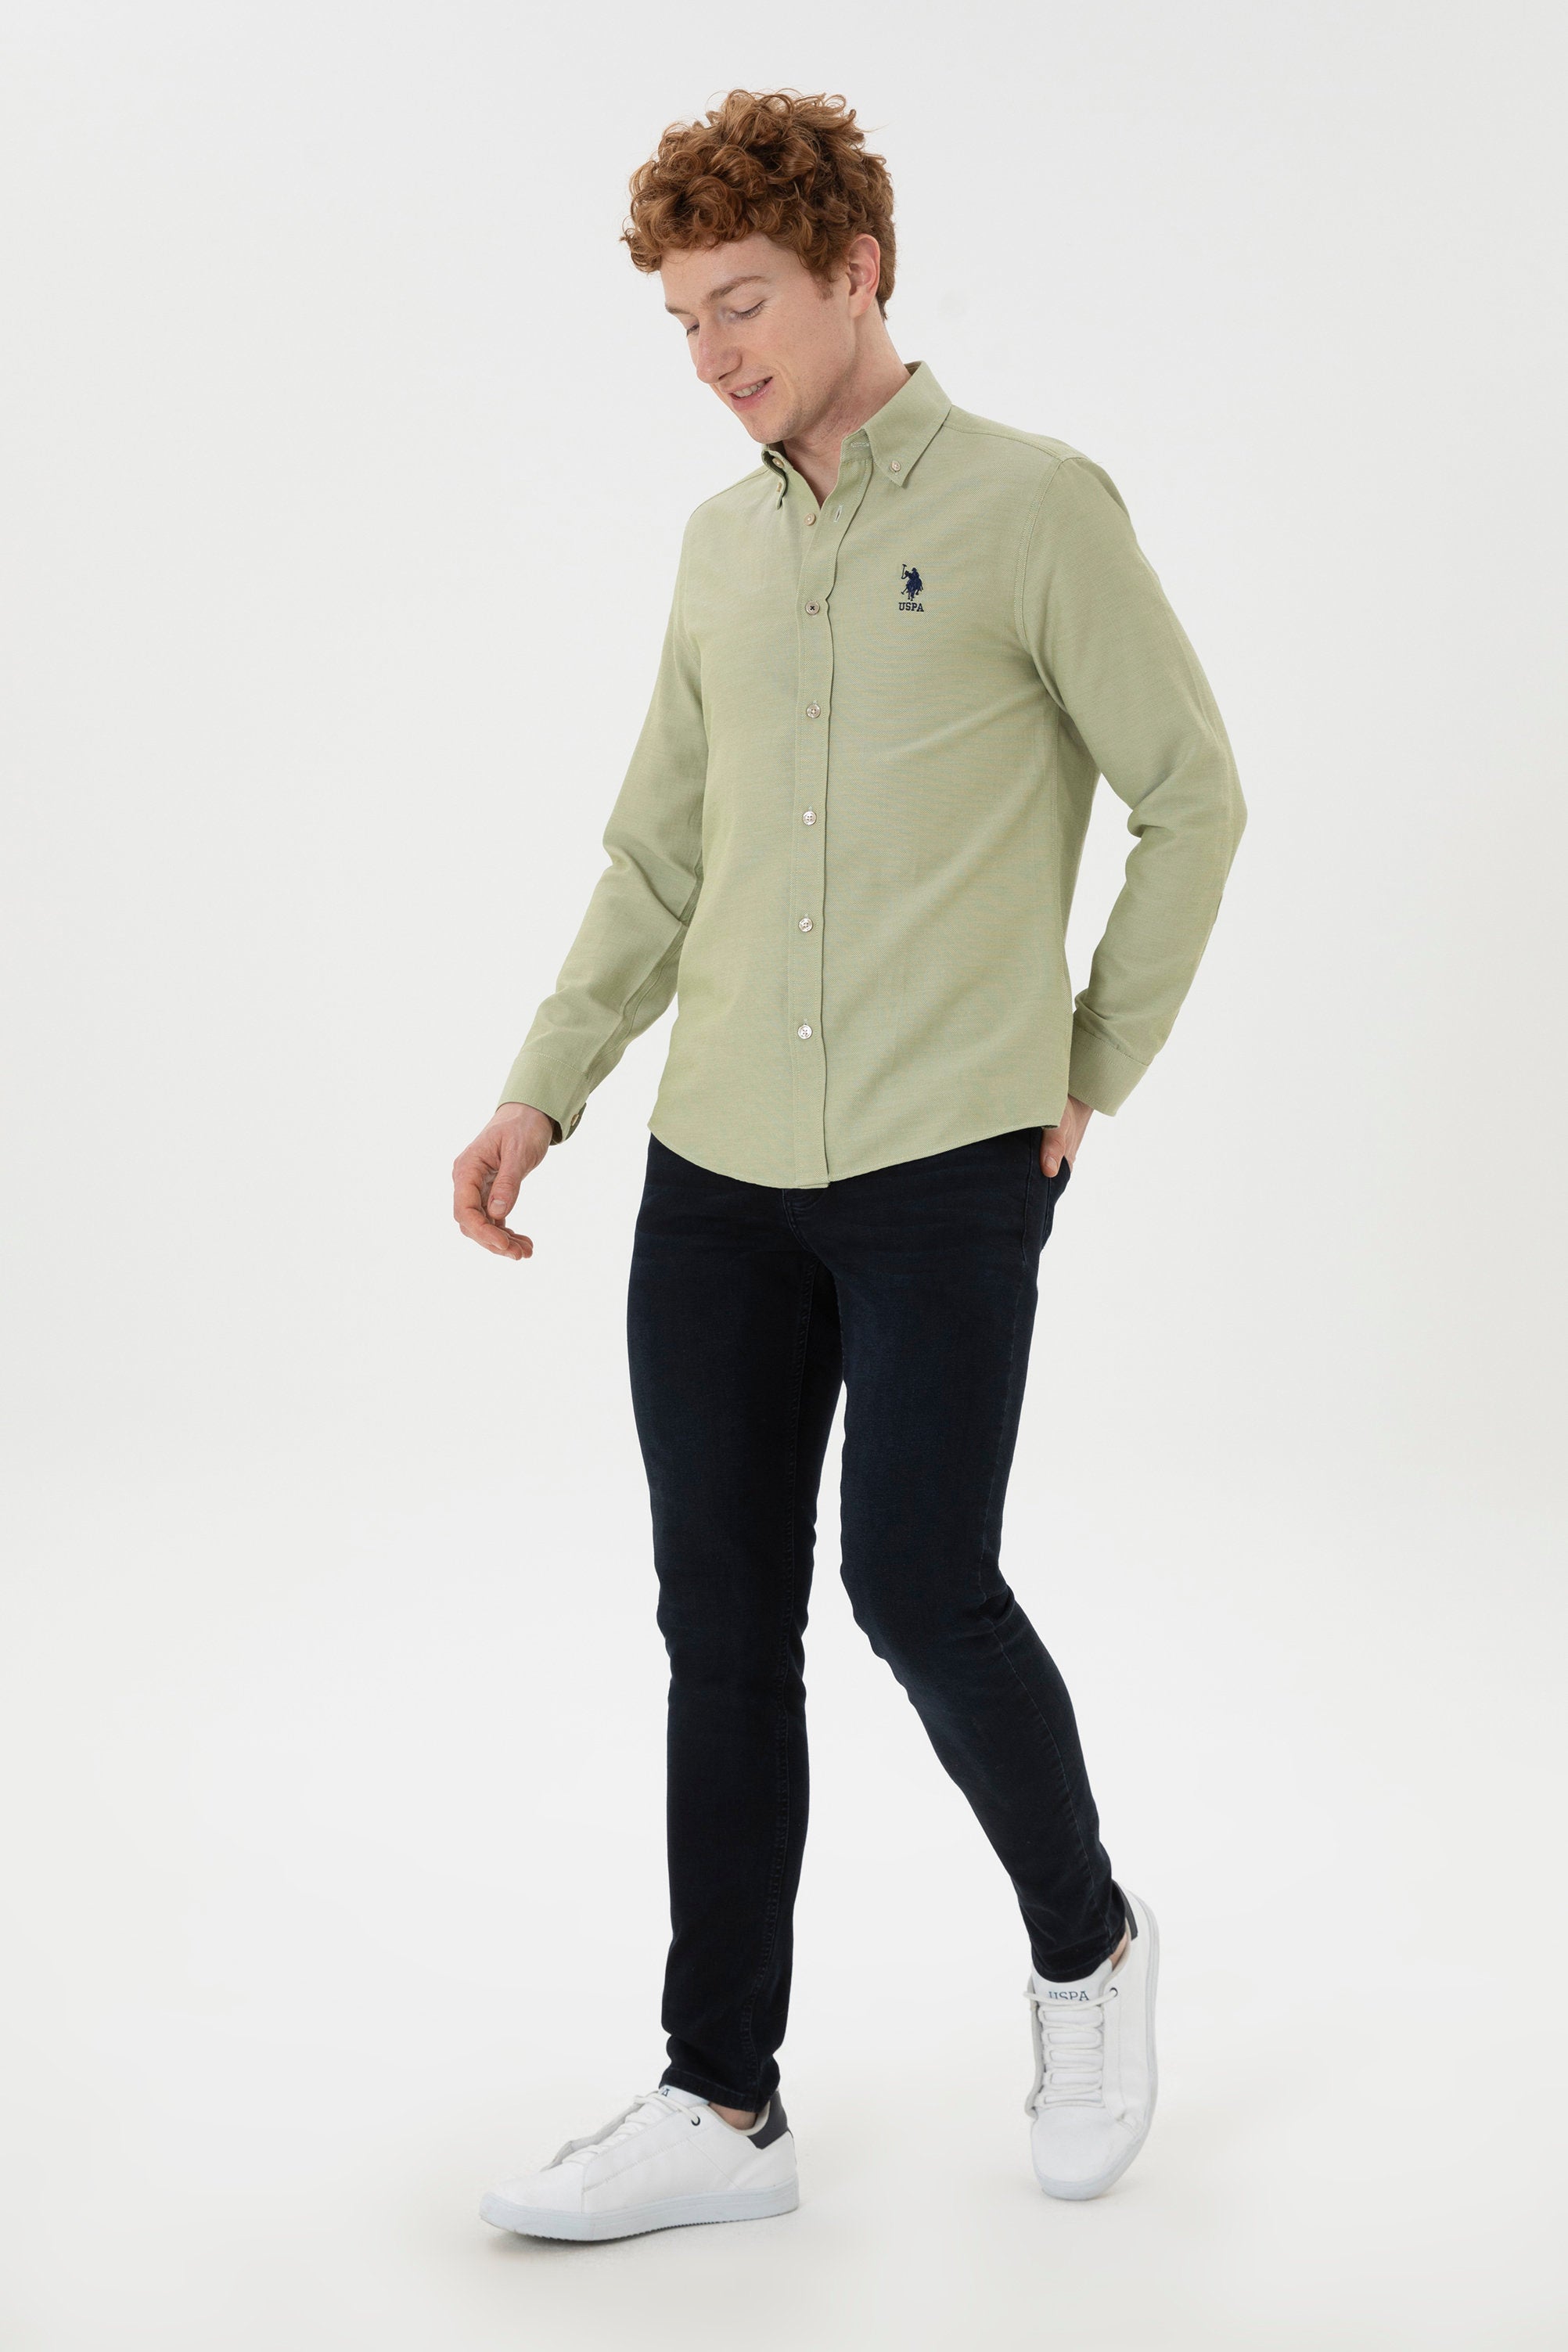 Button Down Shirt With Logo_G081GL0040 1886621_VR183_04